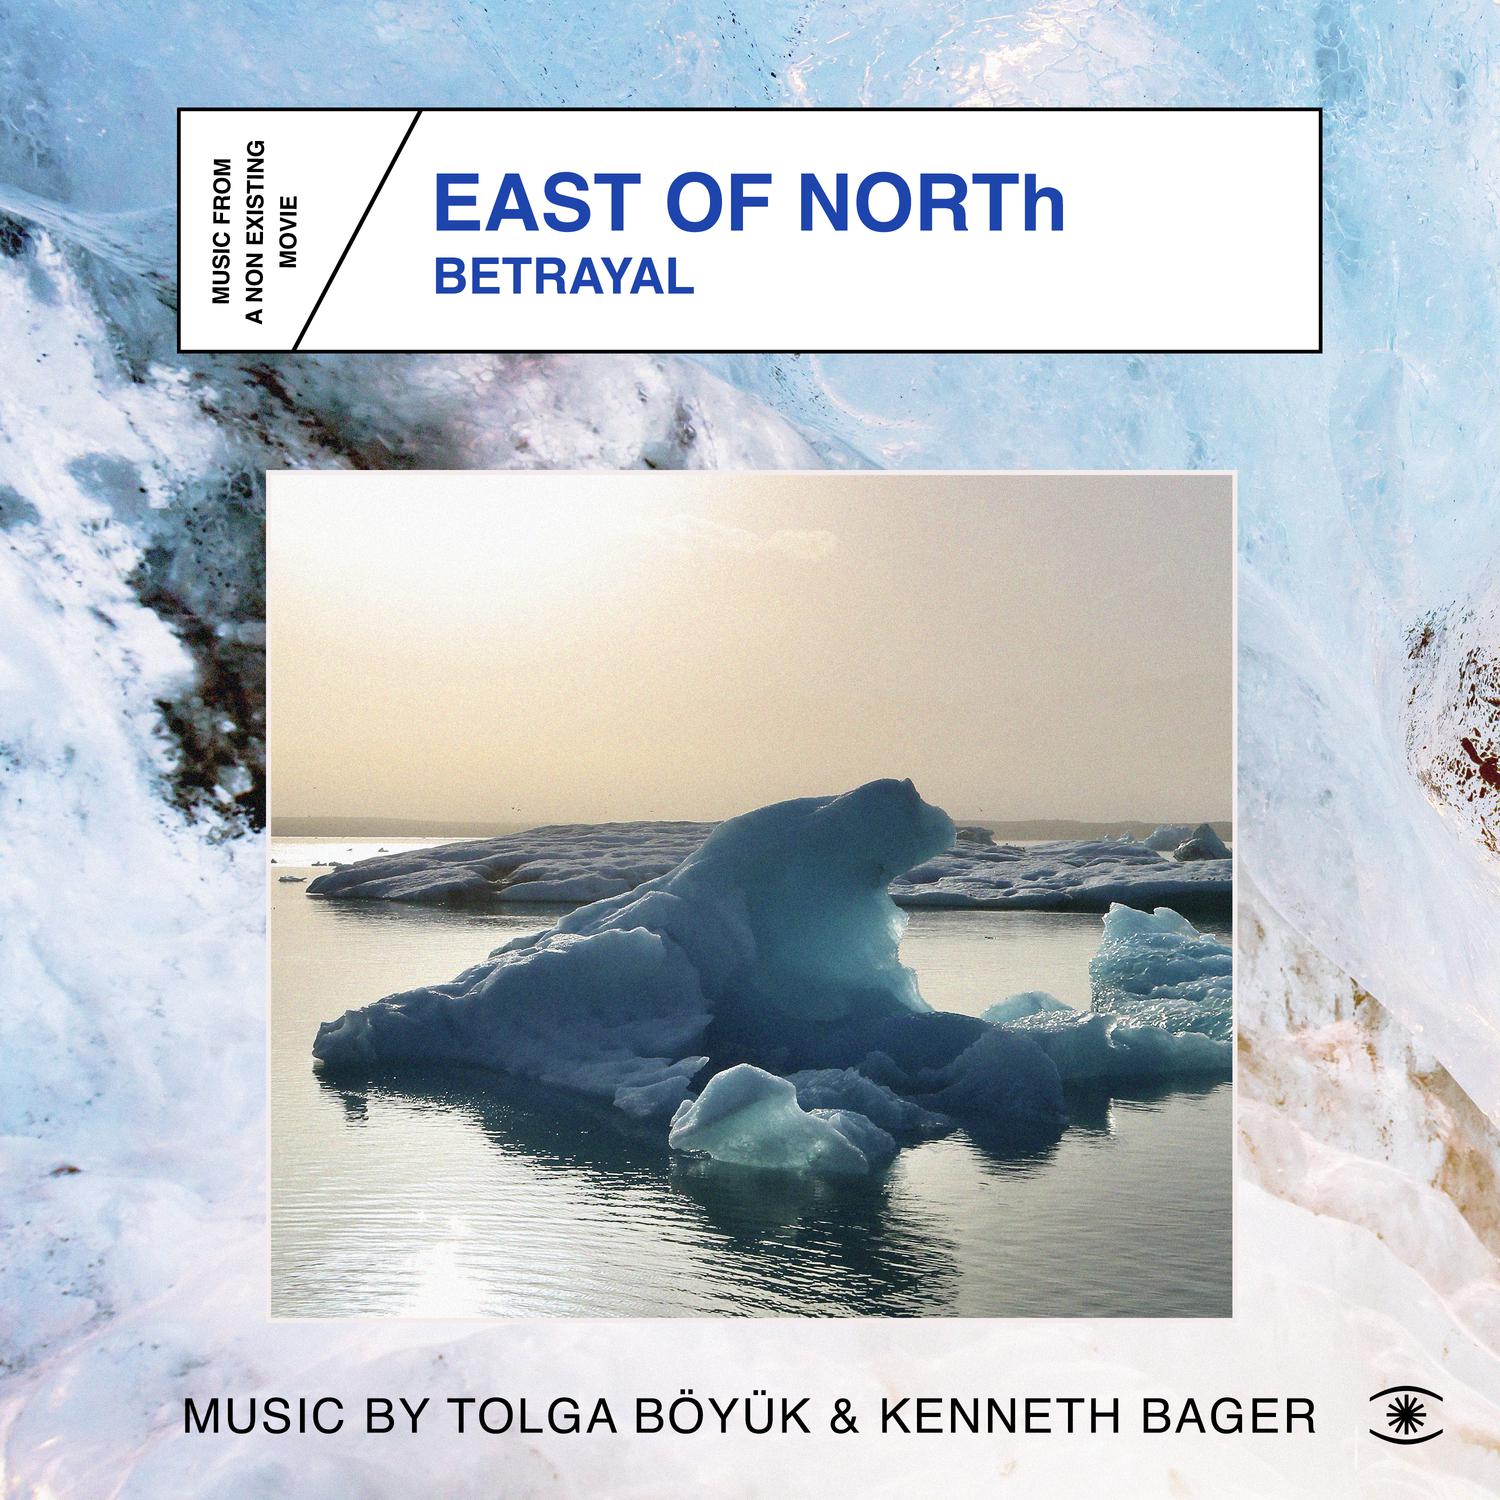 Kenneth Bager - Betrayal